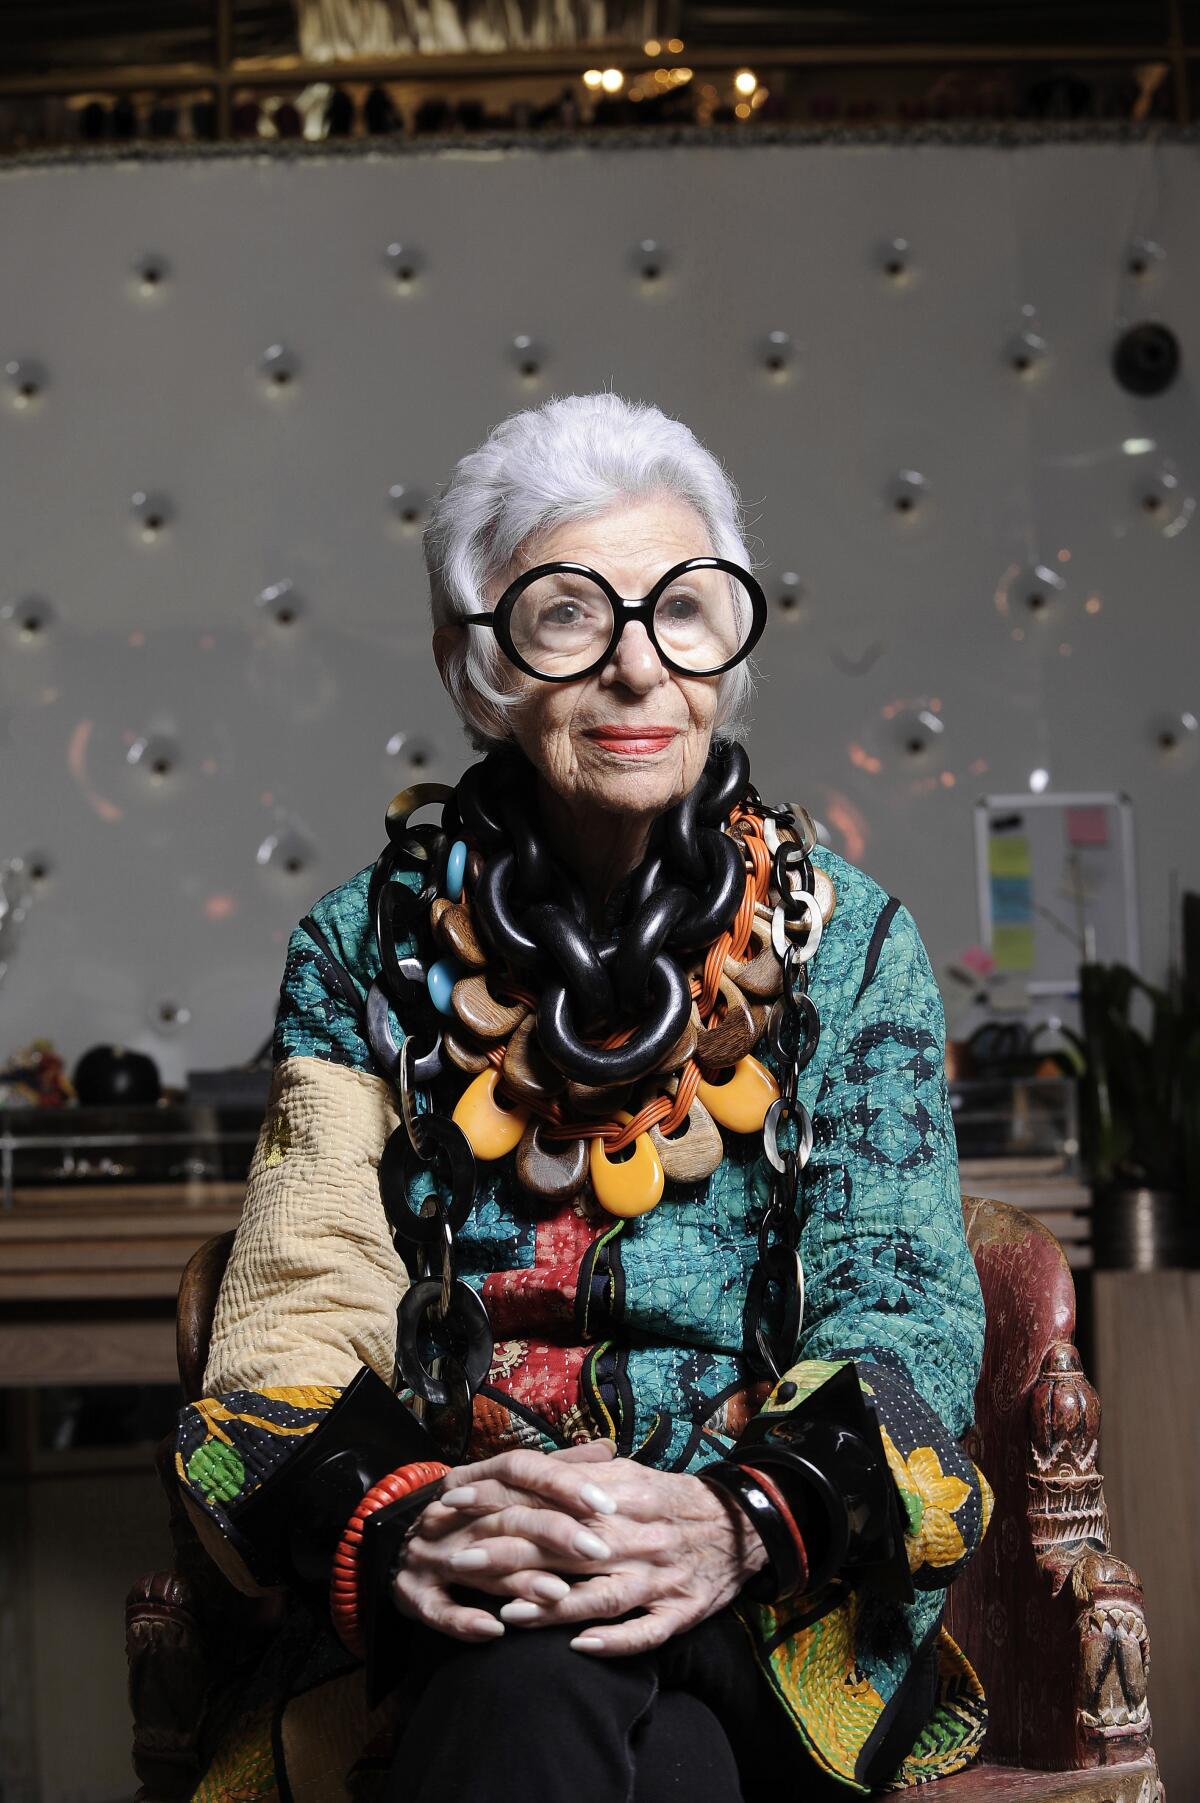 Iris Apfel, in big round glasses, a colorful ensemble and layers of necklaces, sits in a chair with her hands crossed.